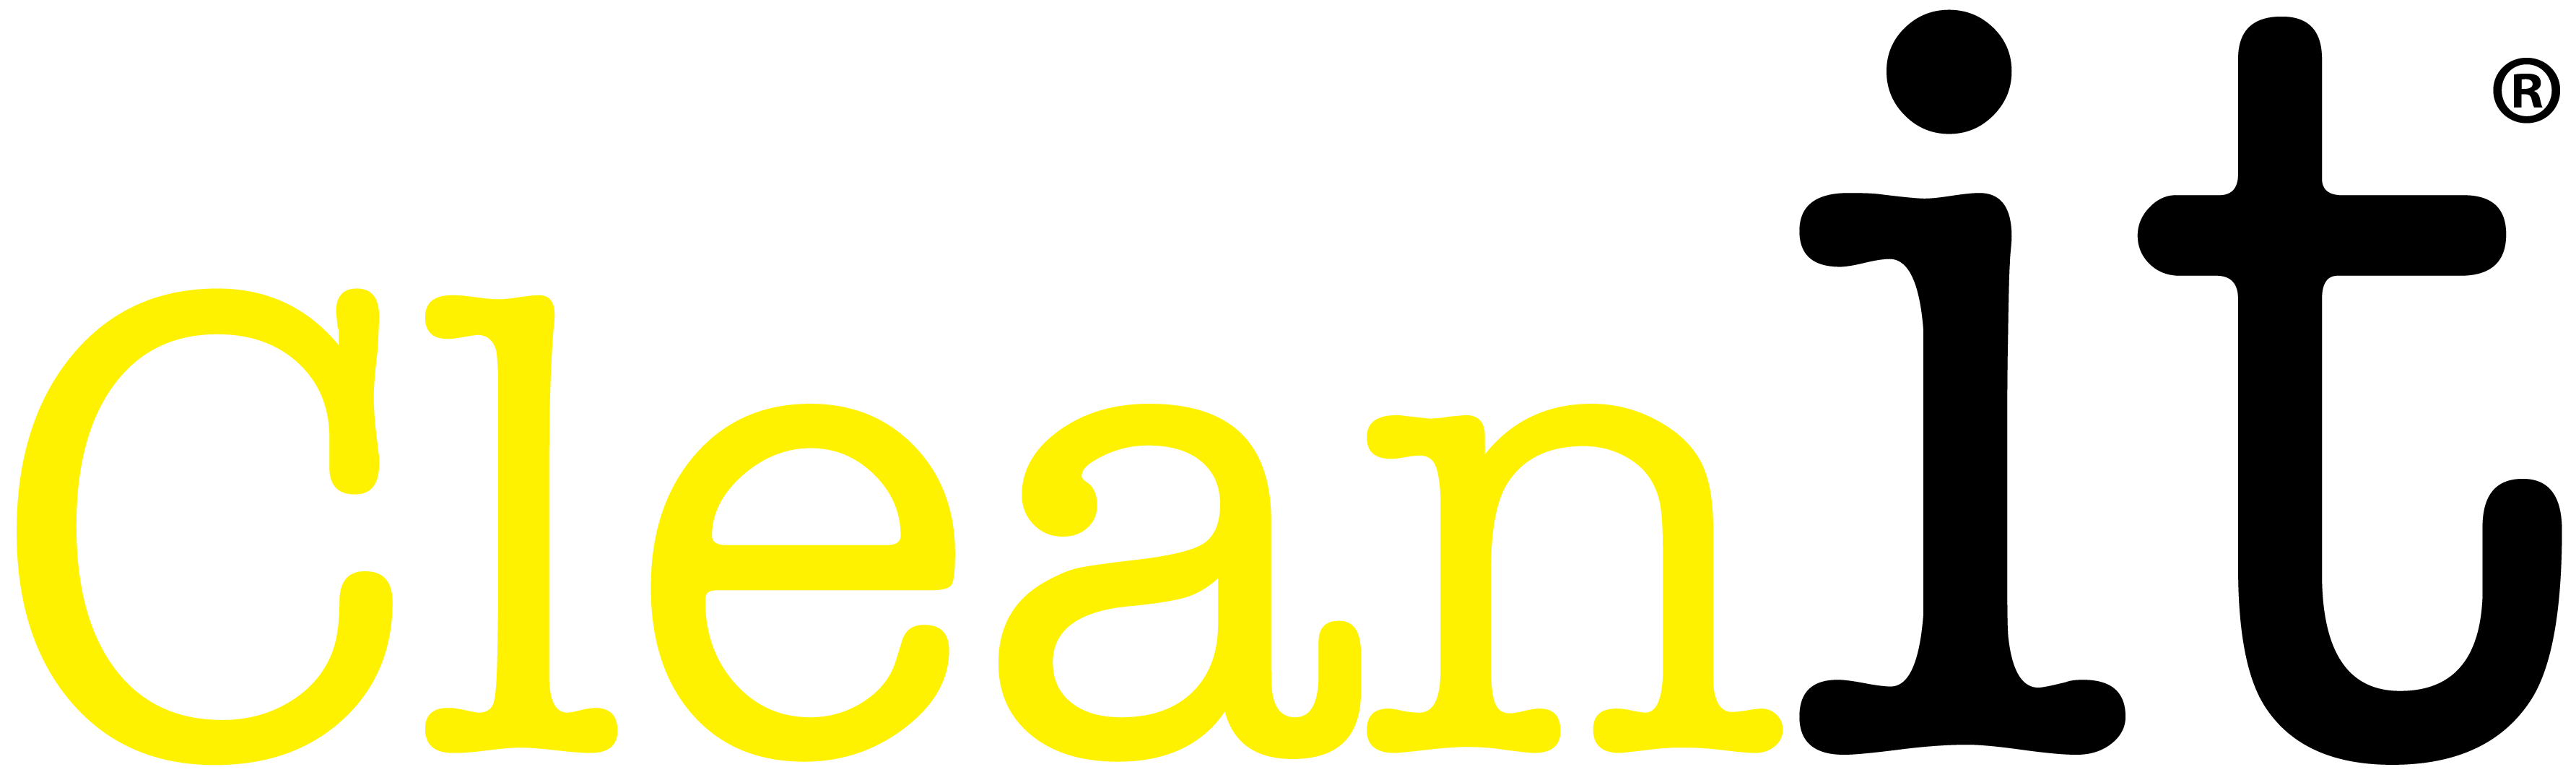 CleanIT_Yellow